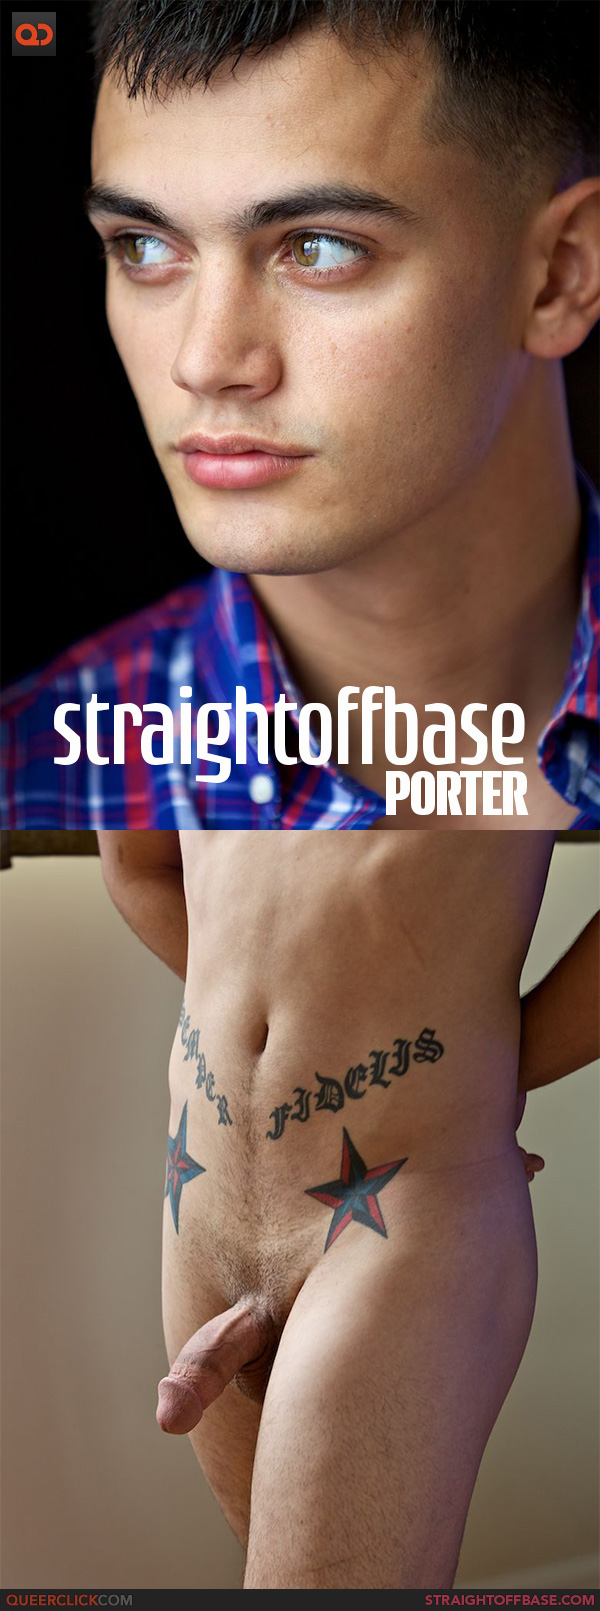 https://www.queerclick.com/r/straight-off-base